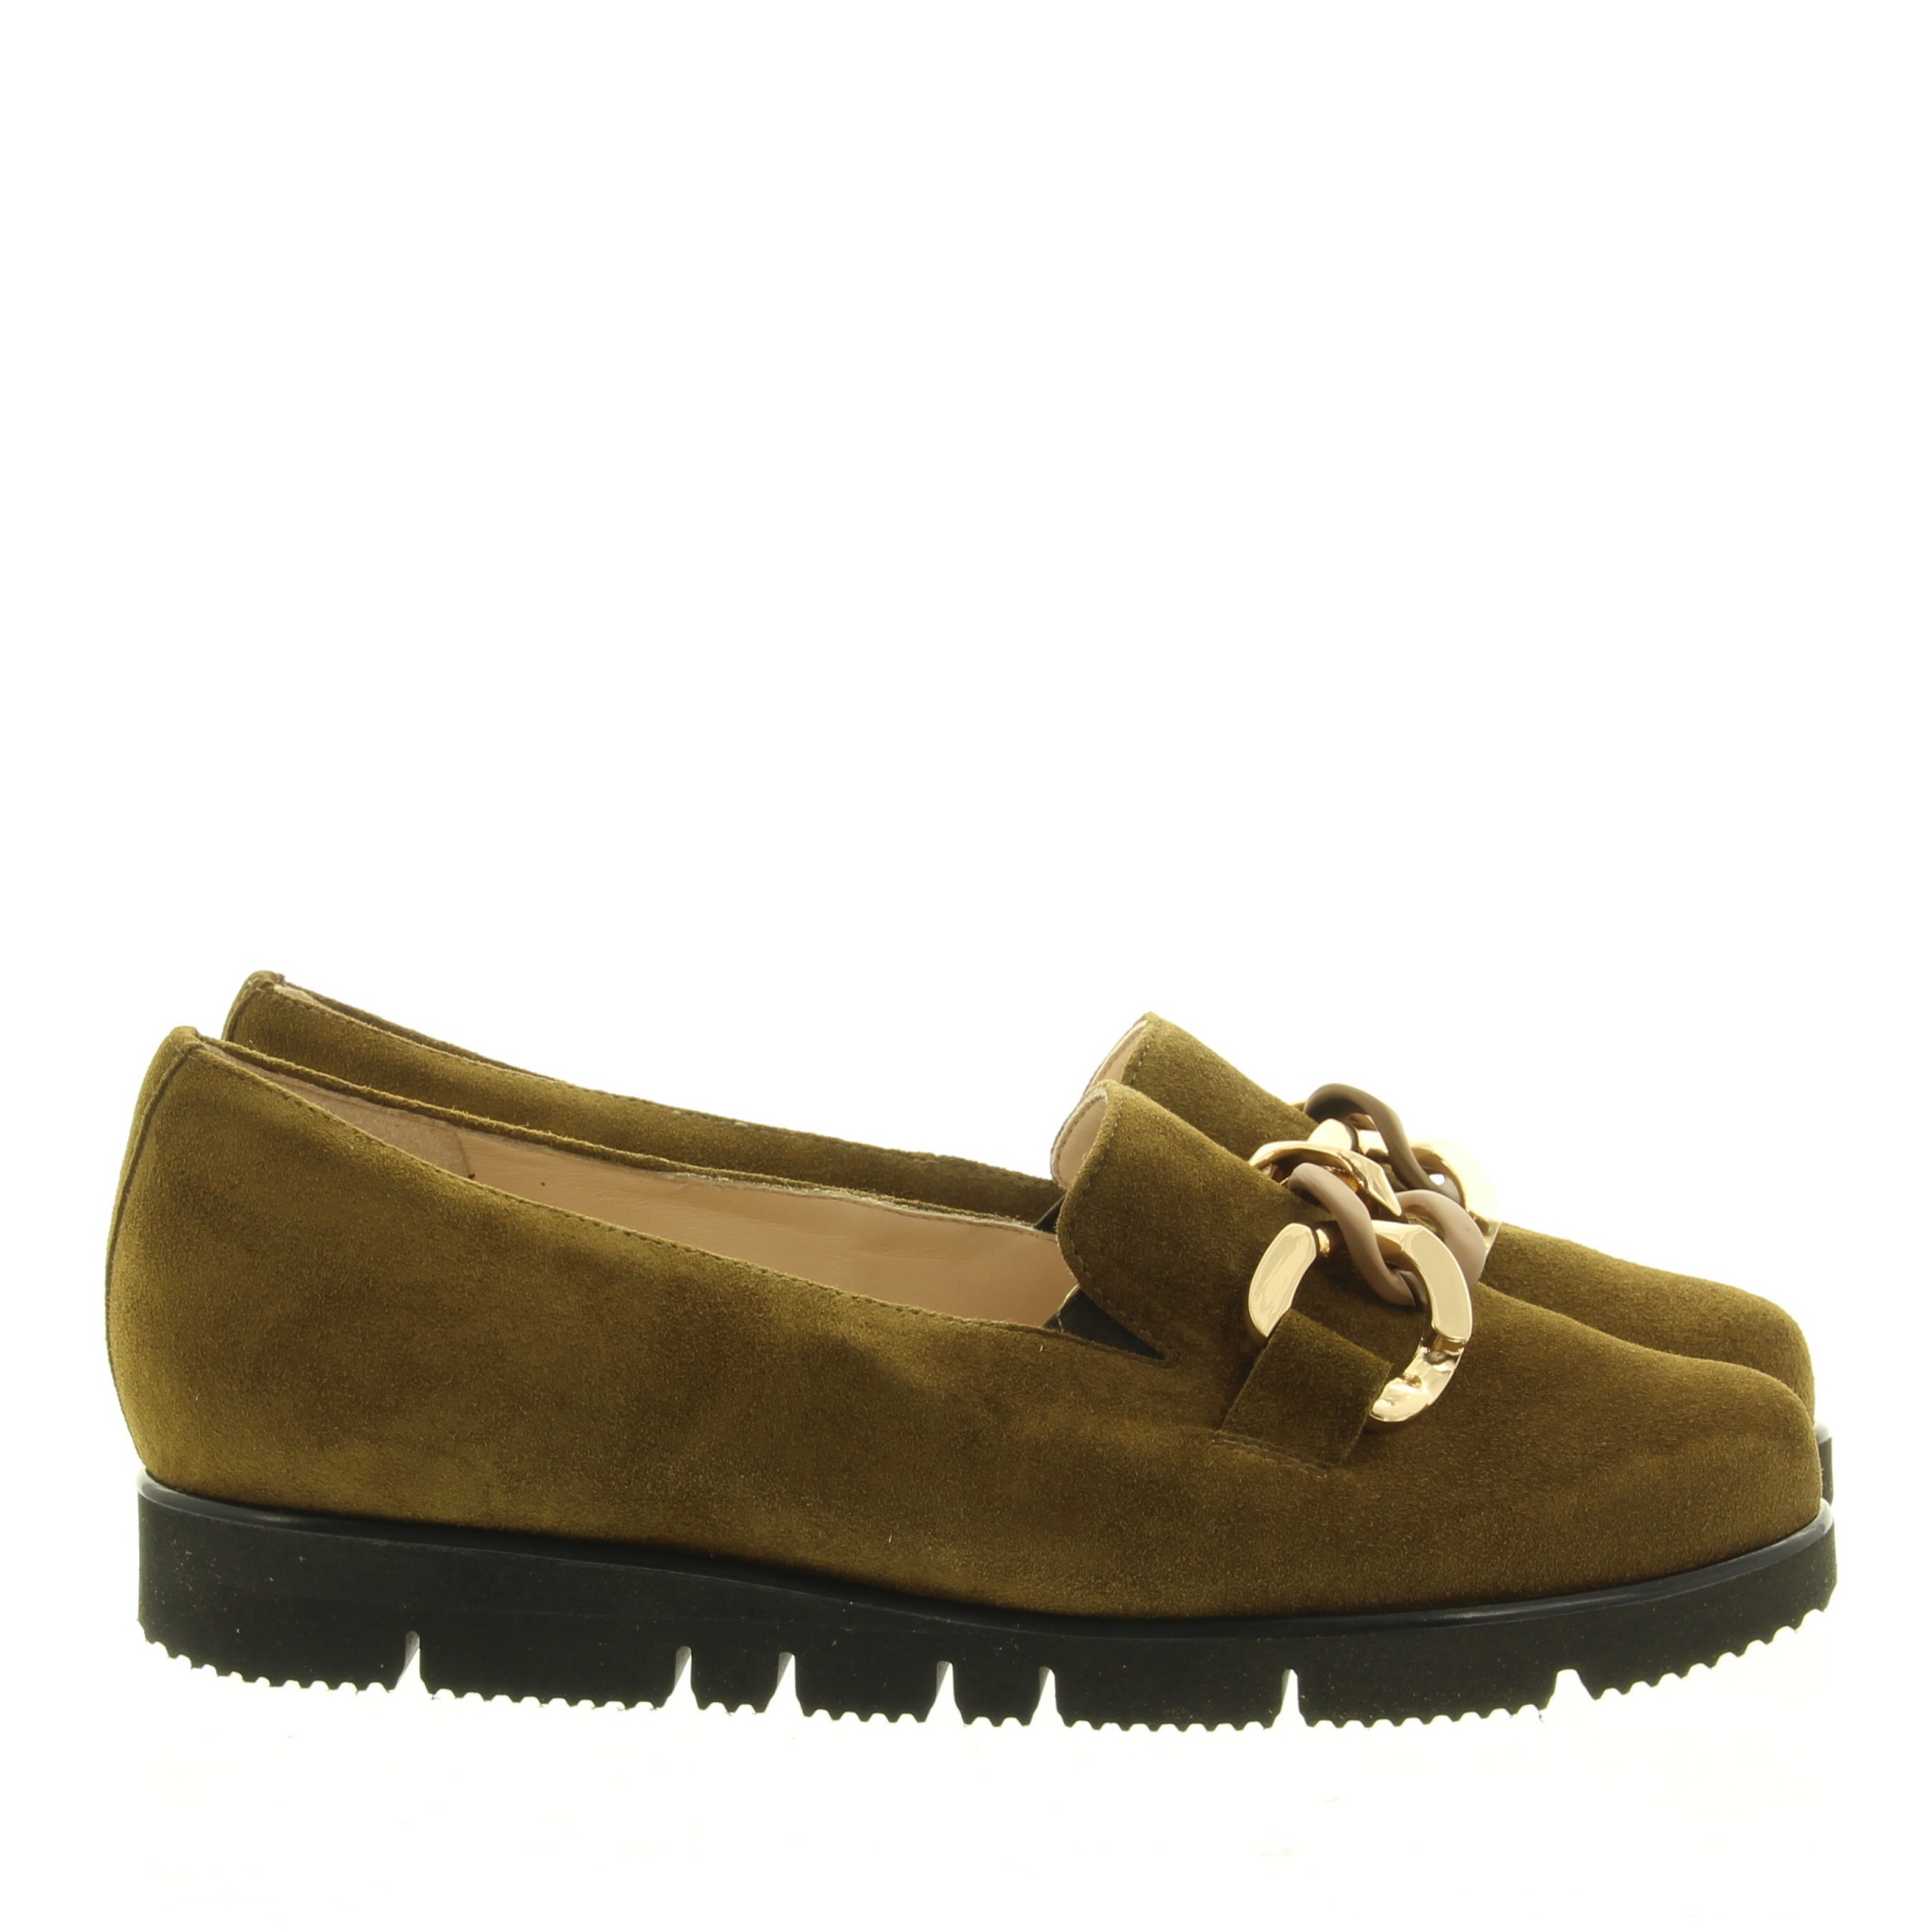 Hassia Shoes 301537 Pisa 5500 Olive